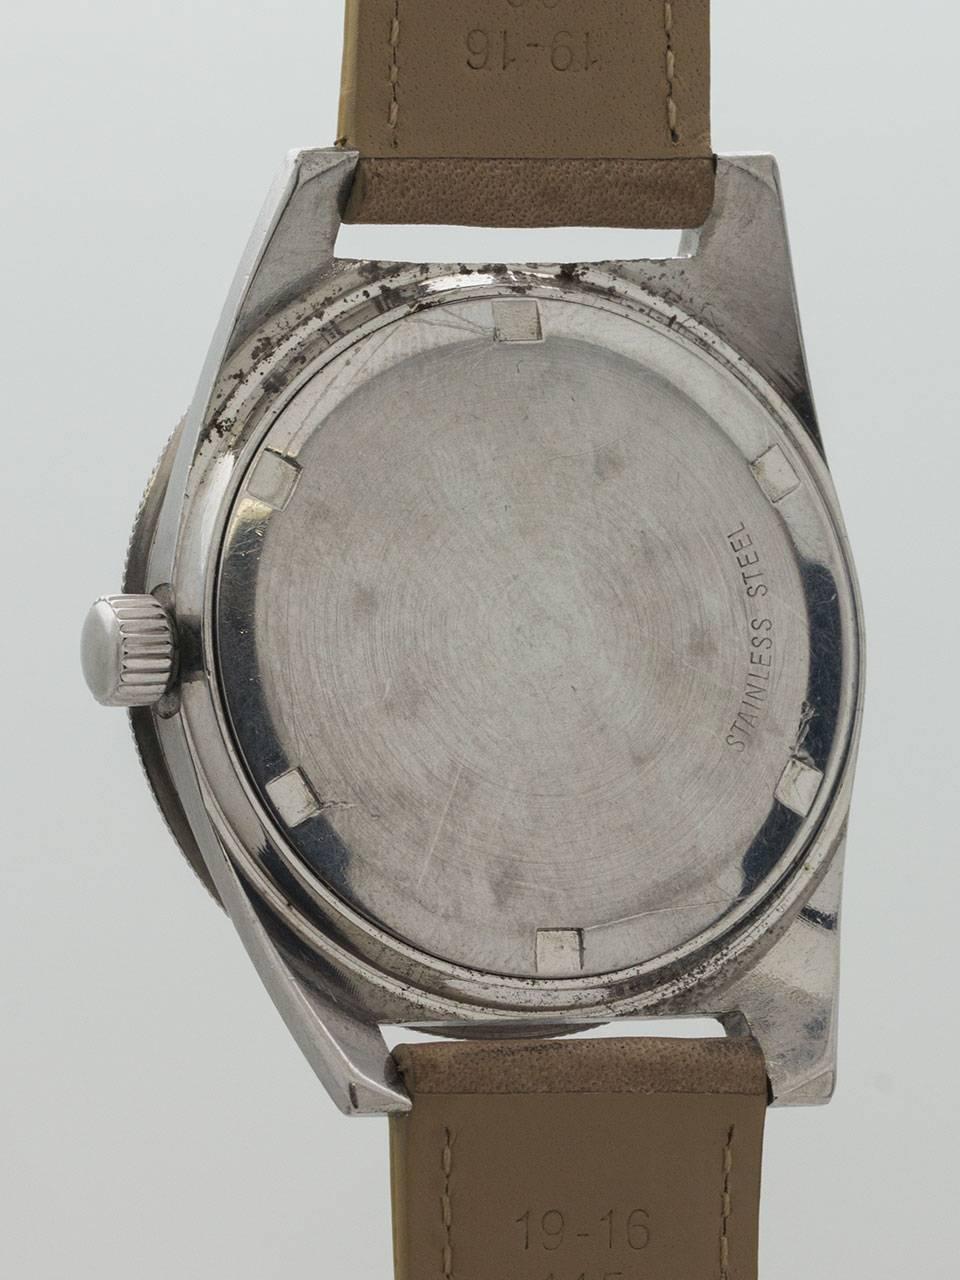 Men's Wittnauer Stainless Steel Diver’s manual wind wristwatch, circa 1960s